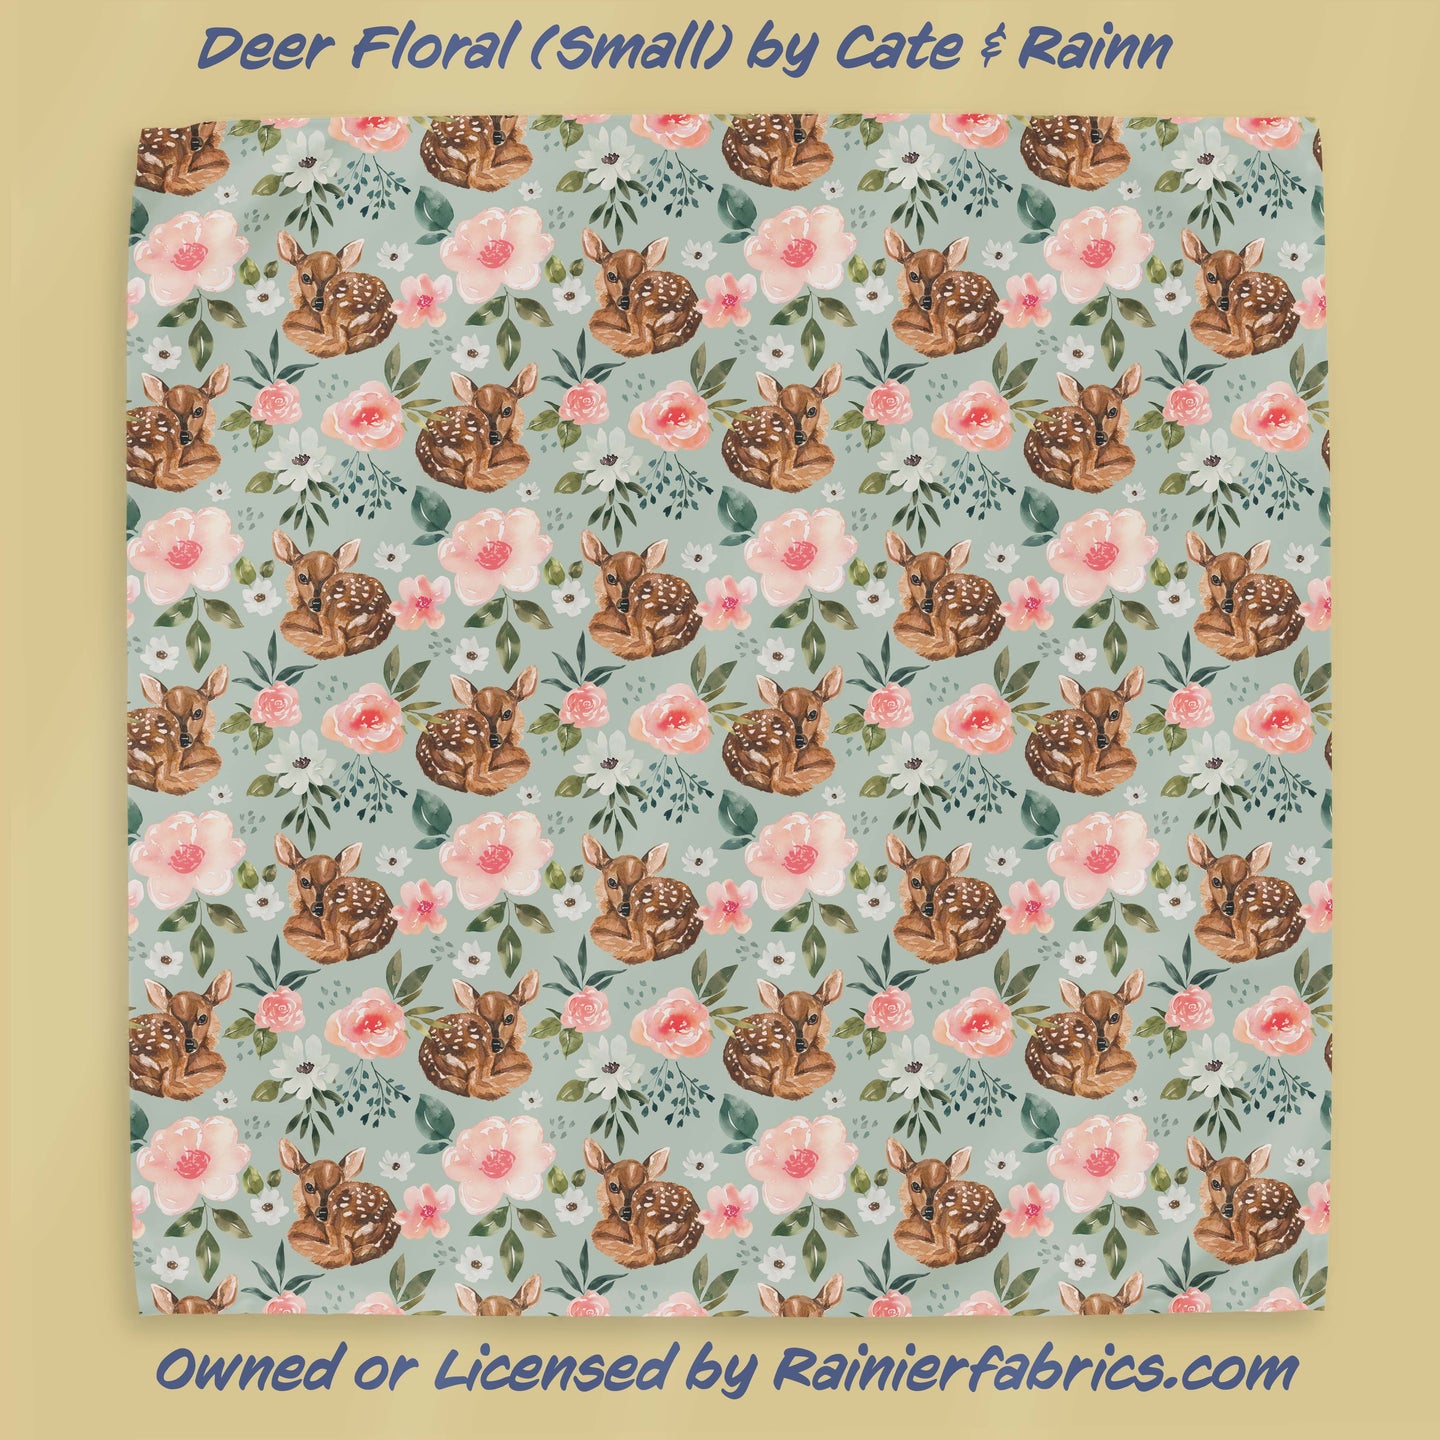 Deer Floral (small) by Cate & Rainn  - 2-5 day turnaround - Order by 1/2 yard; Description of bases below